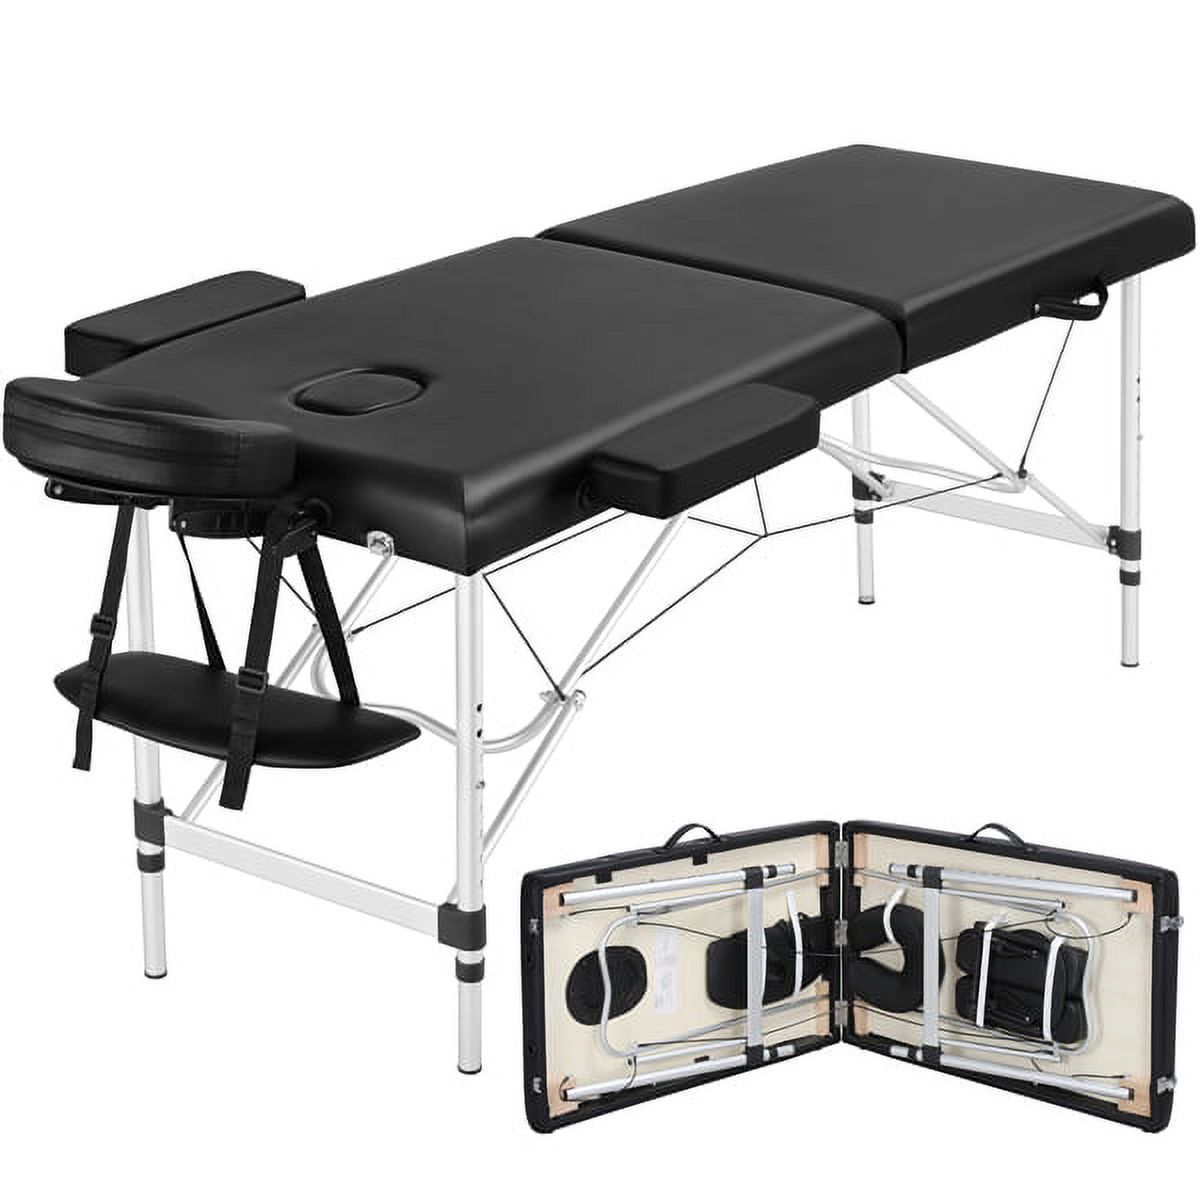 SmileMart 3 Section 84" Portable Adjustable Aluminum  Massage Table for Spa Treatments, Black - image 5 of 13